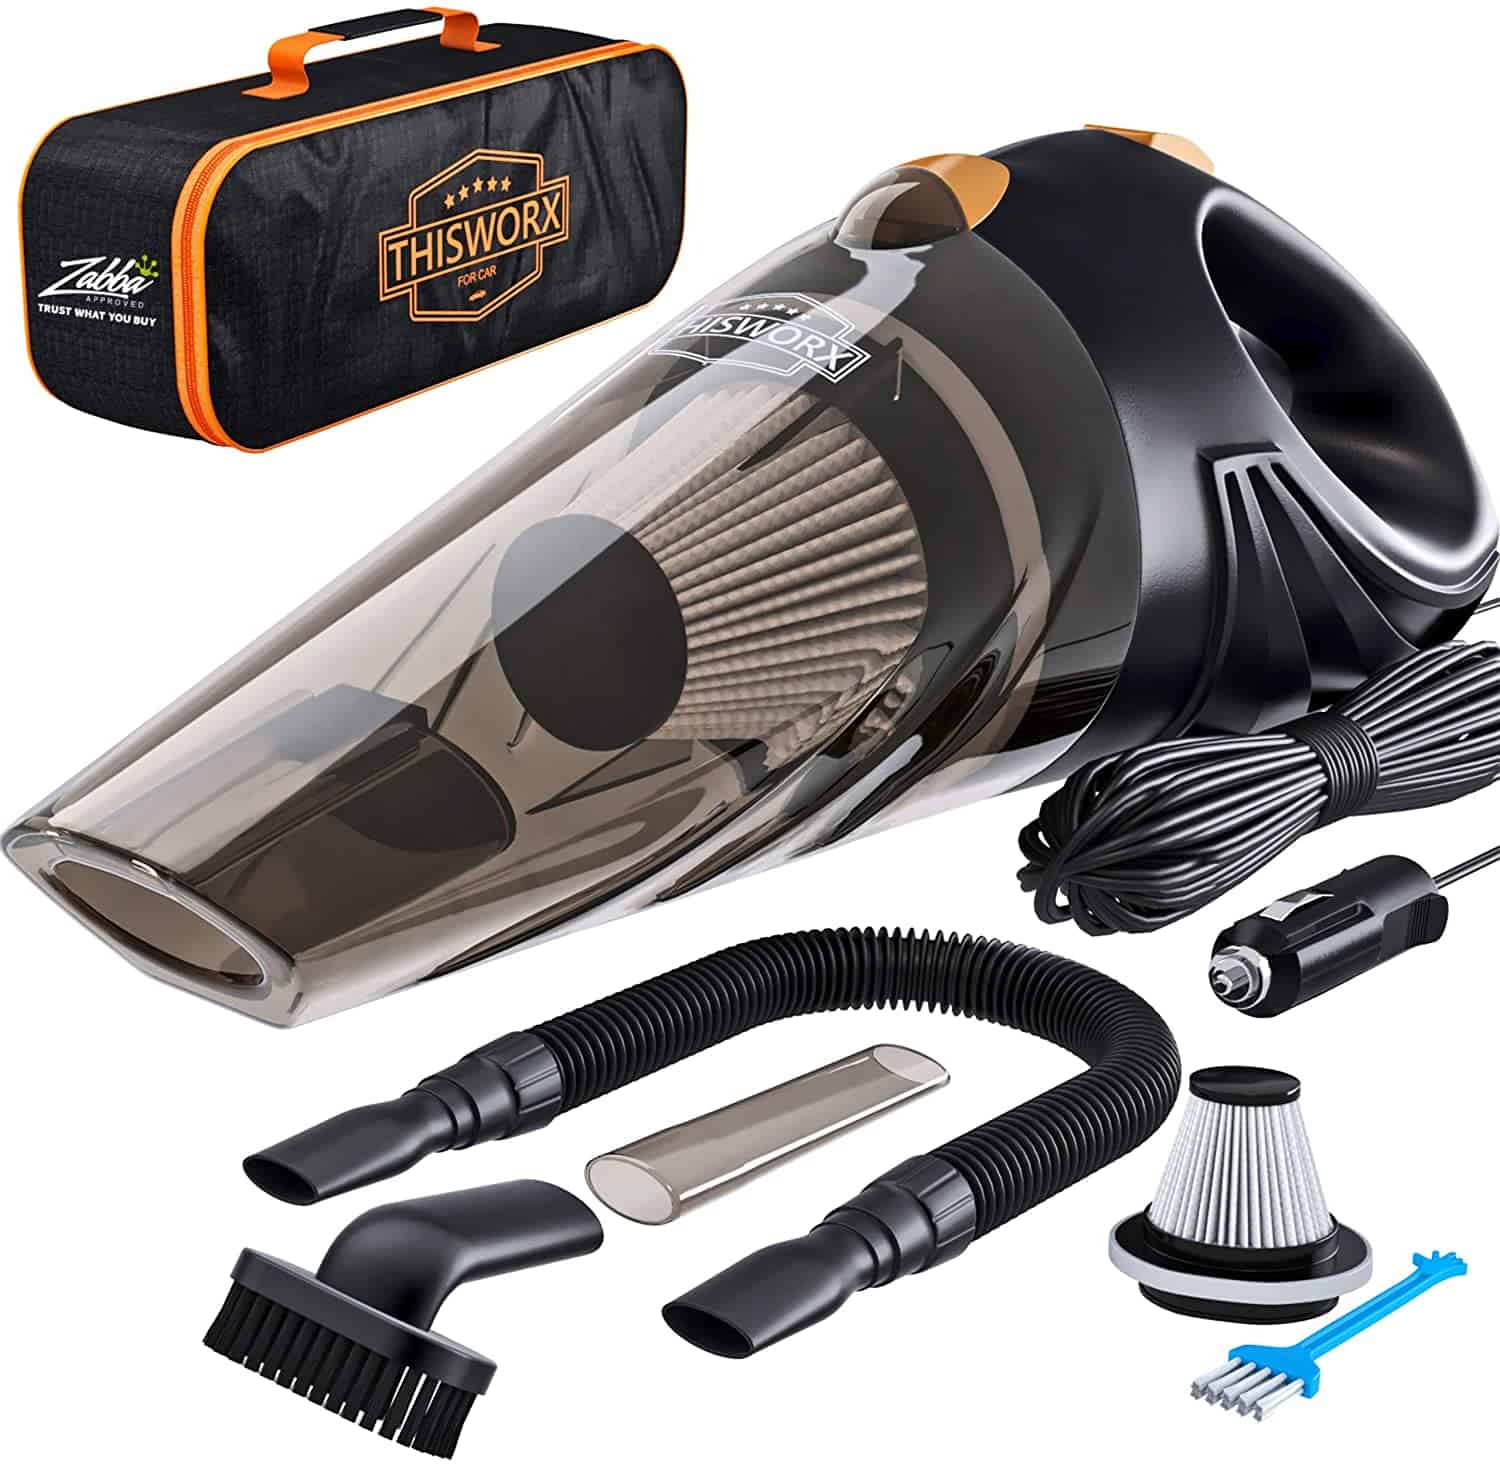 Portable Car Vacuum Cleaner ONLY $21.27 (Reg $45) at Amazon